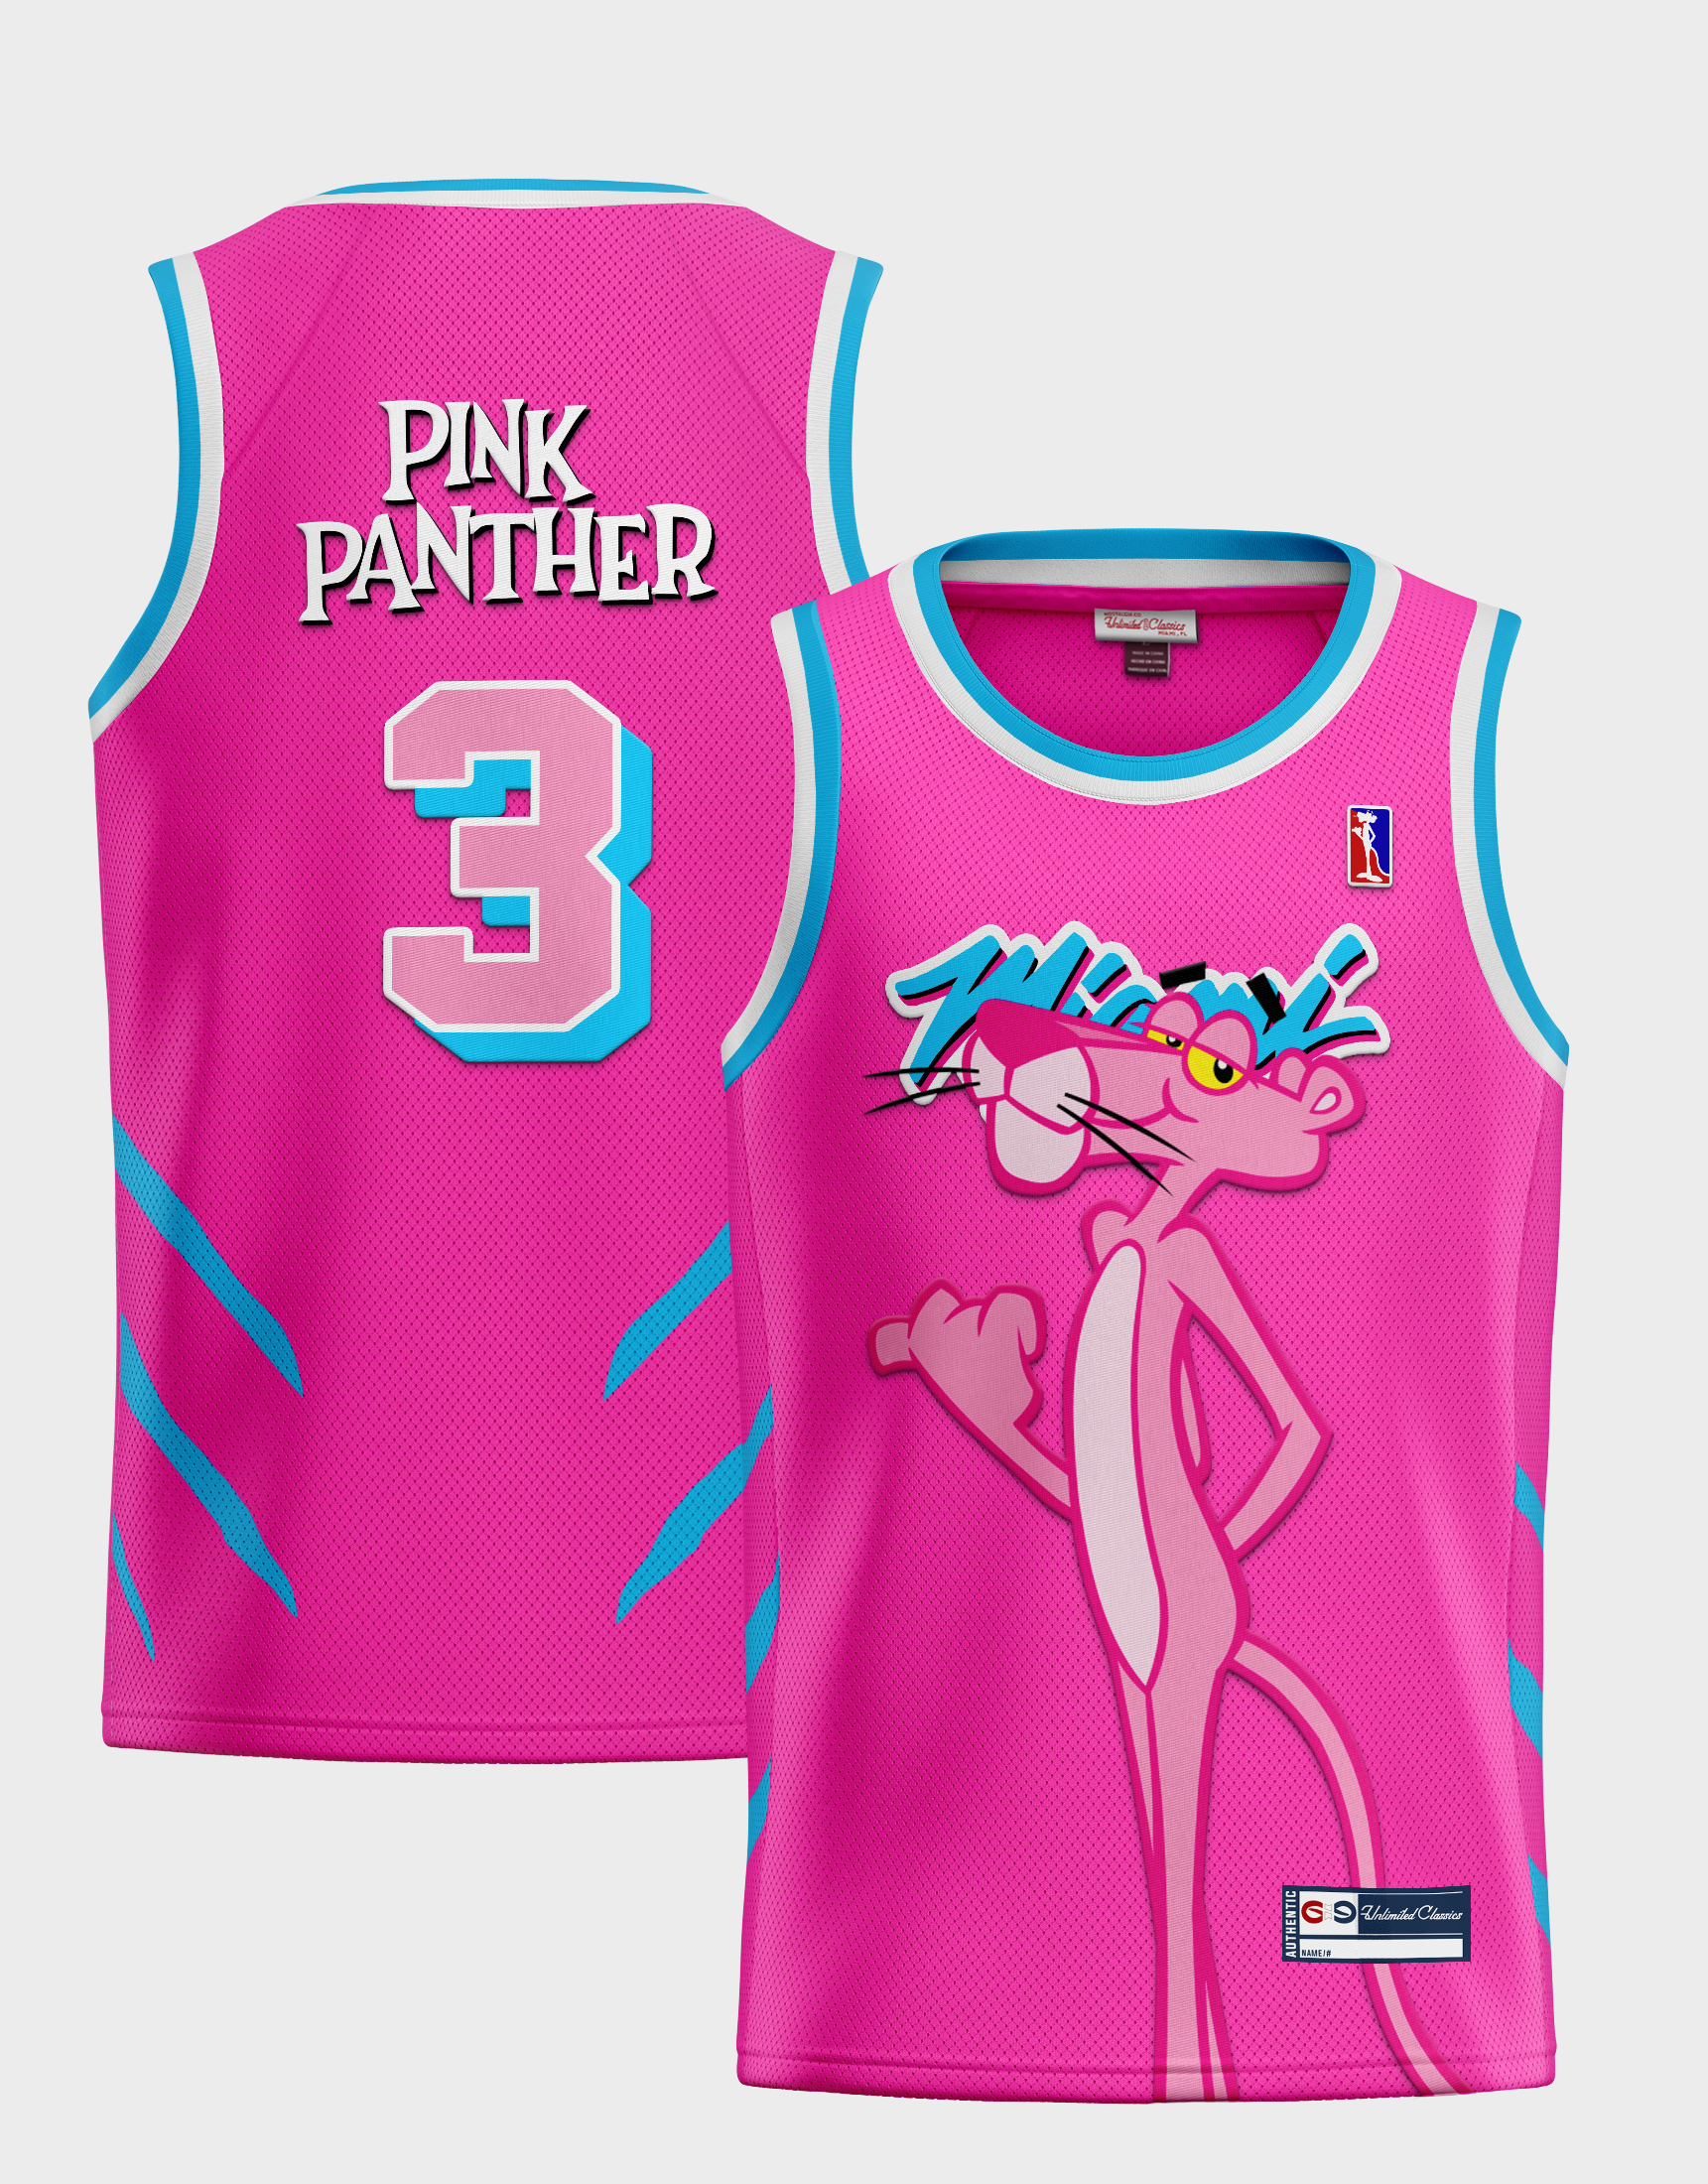 Unlimited Classics Youth Miami x Pink Panther #3 Basketball Jersey M